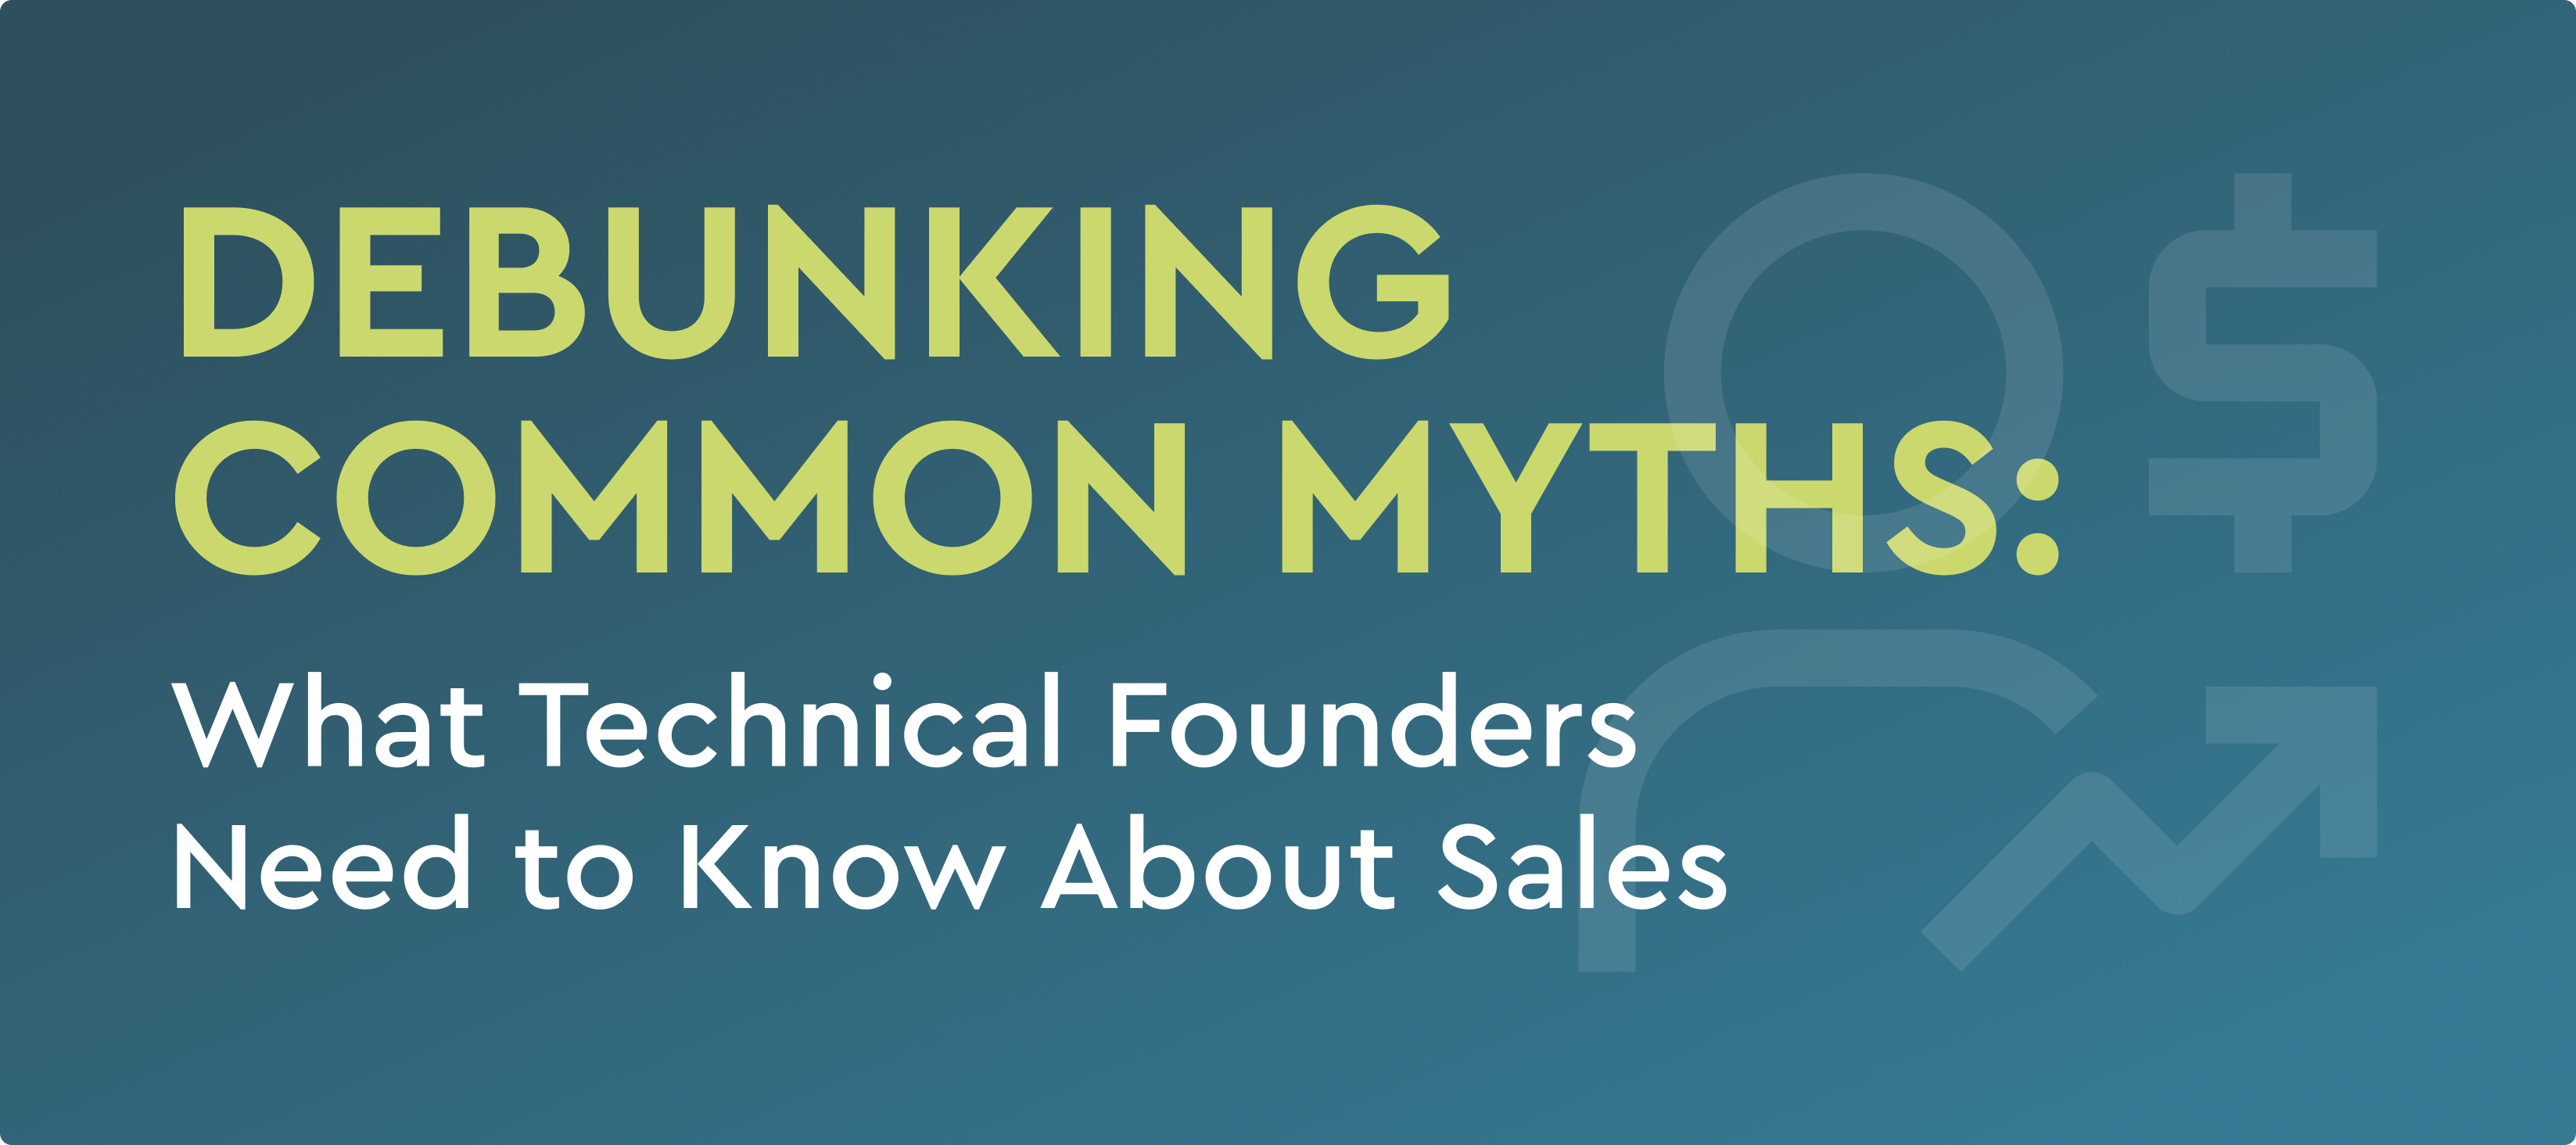 resources Debunking common myths: what technical founders need to know about sales